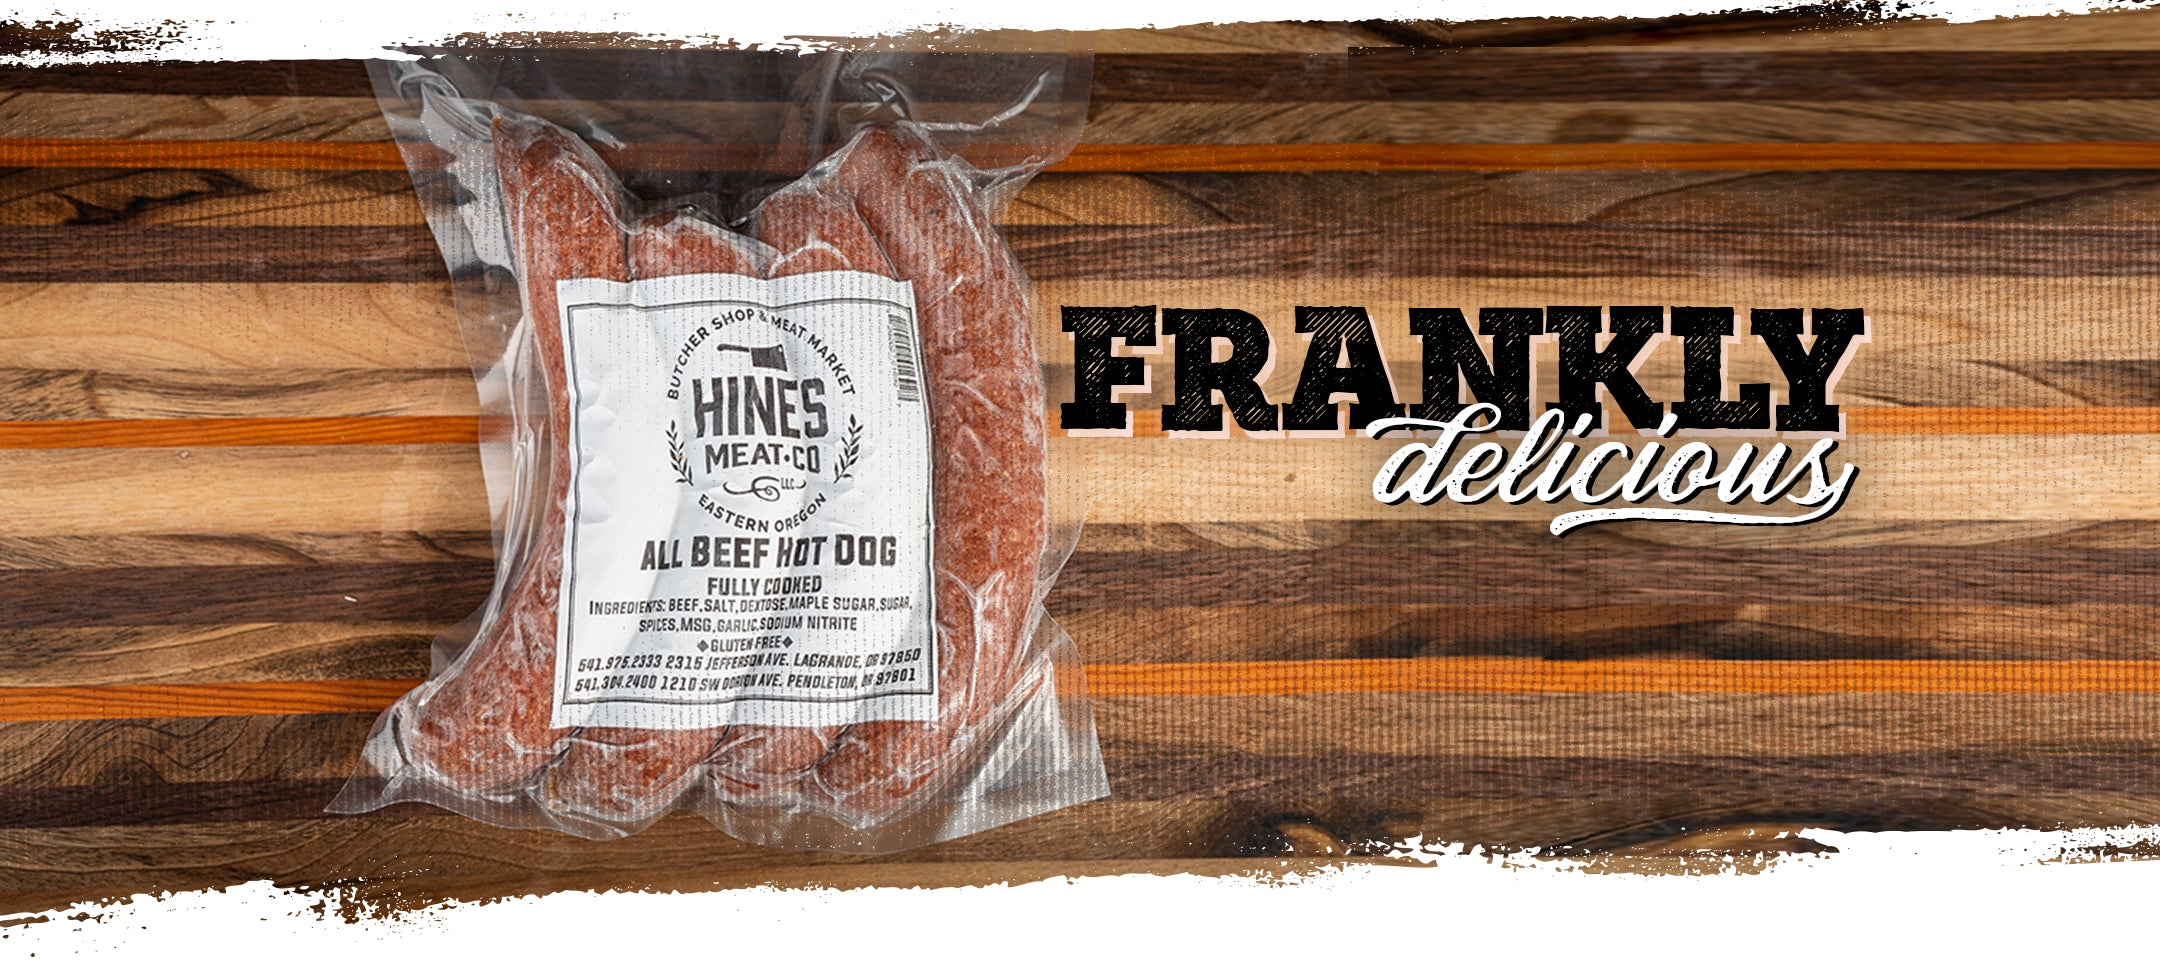 Frankly Delicious Meat Franks. Discover a world of exceptional flavors at Hines Meat Co., proudly recognized as Oregon’s Best Butcher Shop. We bring you a premium selection of fresh meats alongside irresistible snack sticks, beef jerky, and summer sausage to satisfy your every craving. Fresh Meat, Snack Sticks, Beef Jerky, Summer Sausage l ORDER NOW